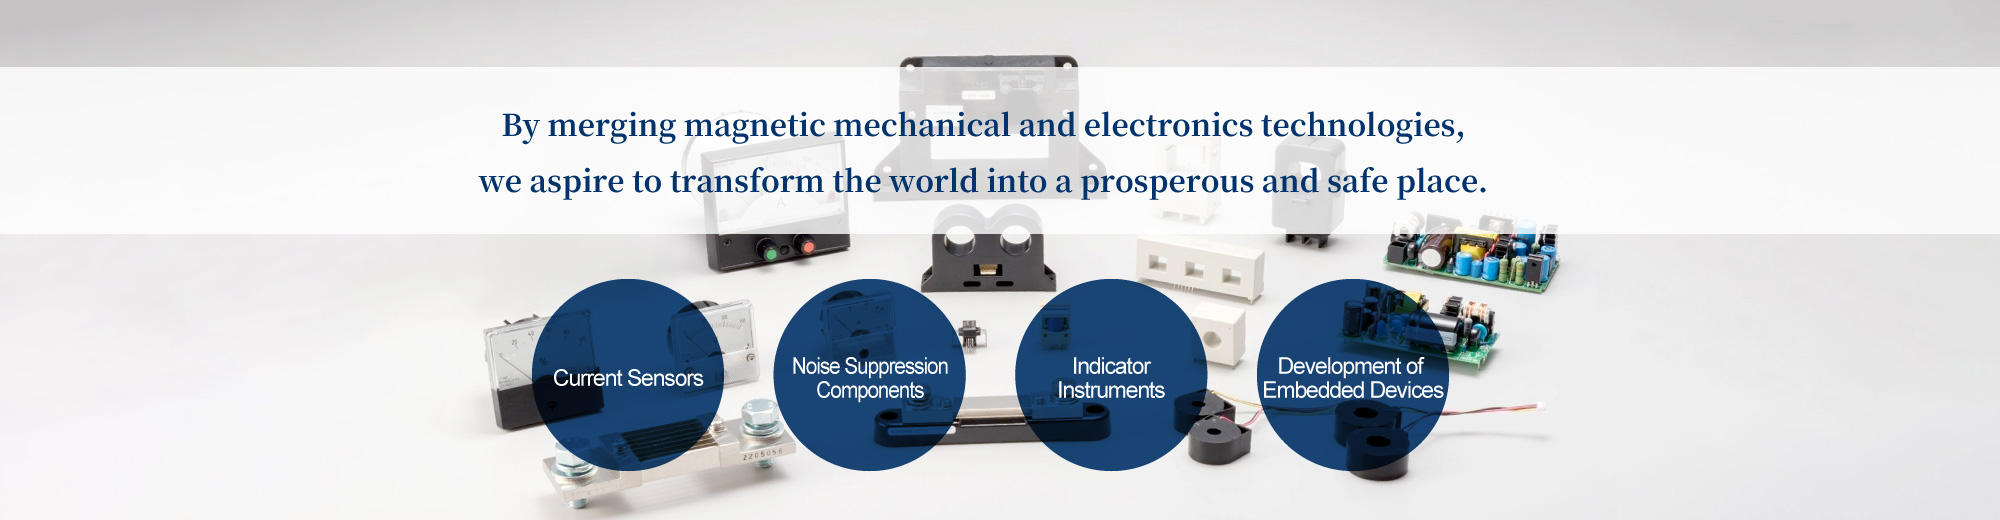 By merging magnetic mechanical and electronics technologies, we aspire to transform the world into a prosperous and safe place.